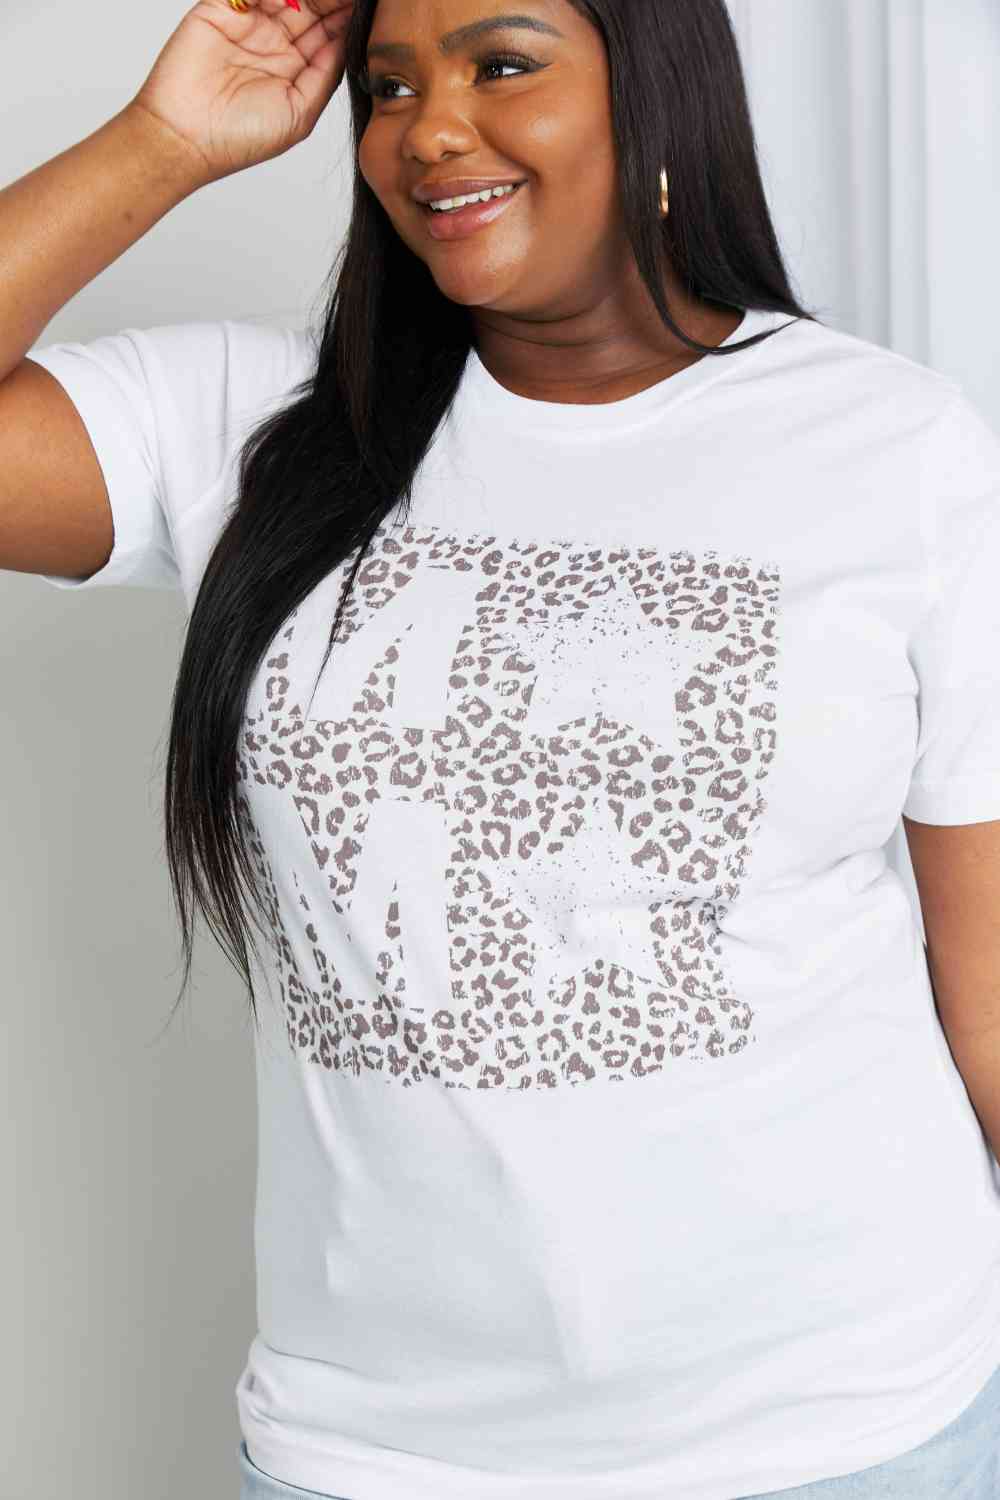 mineB Full Size Leopard Graphic Tee Shirt